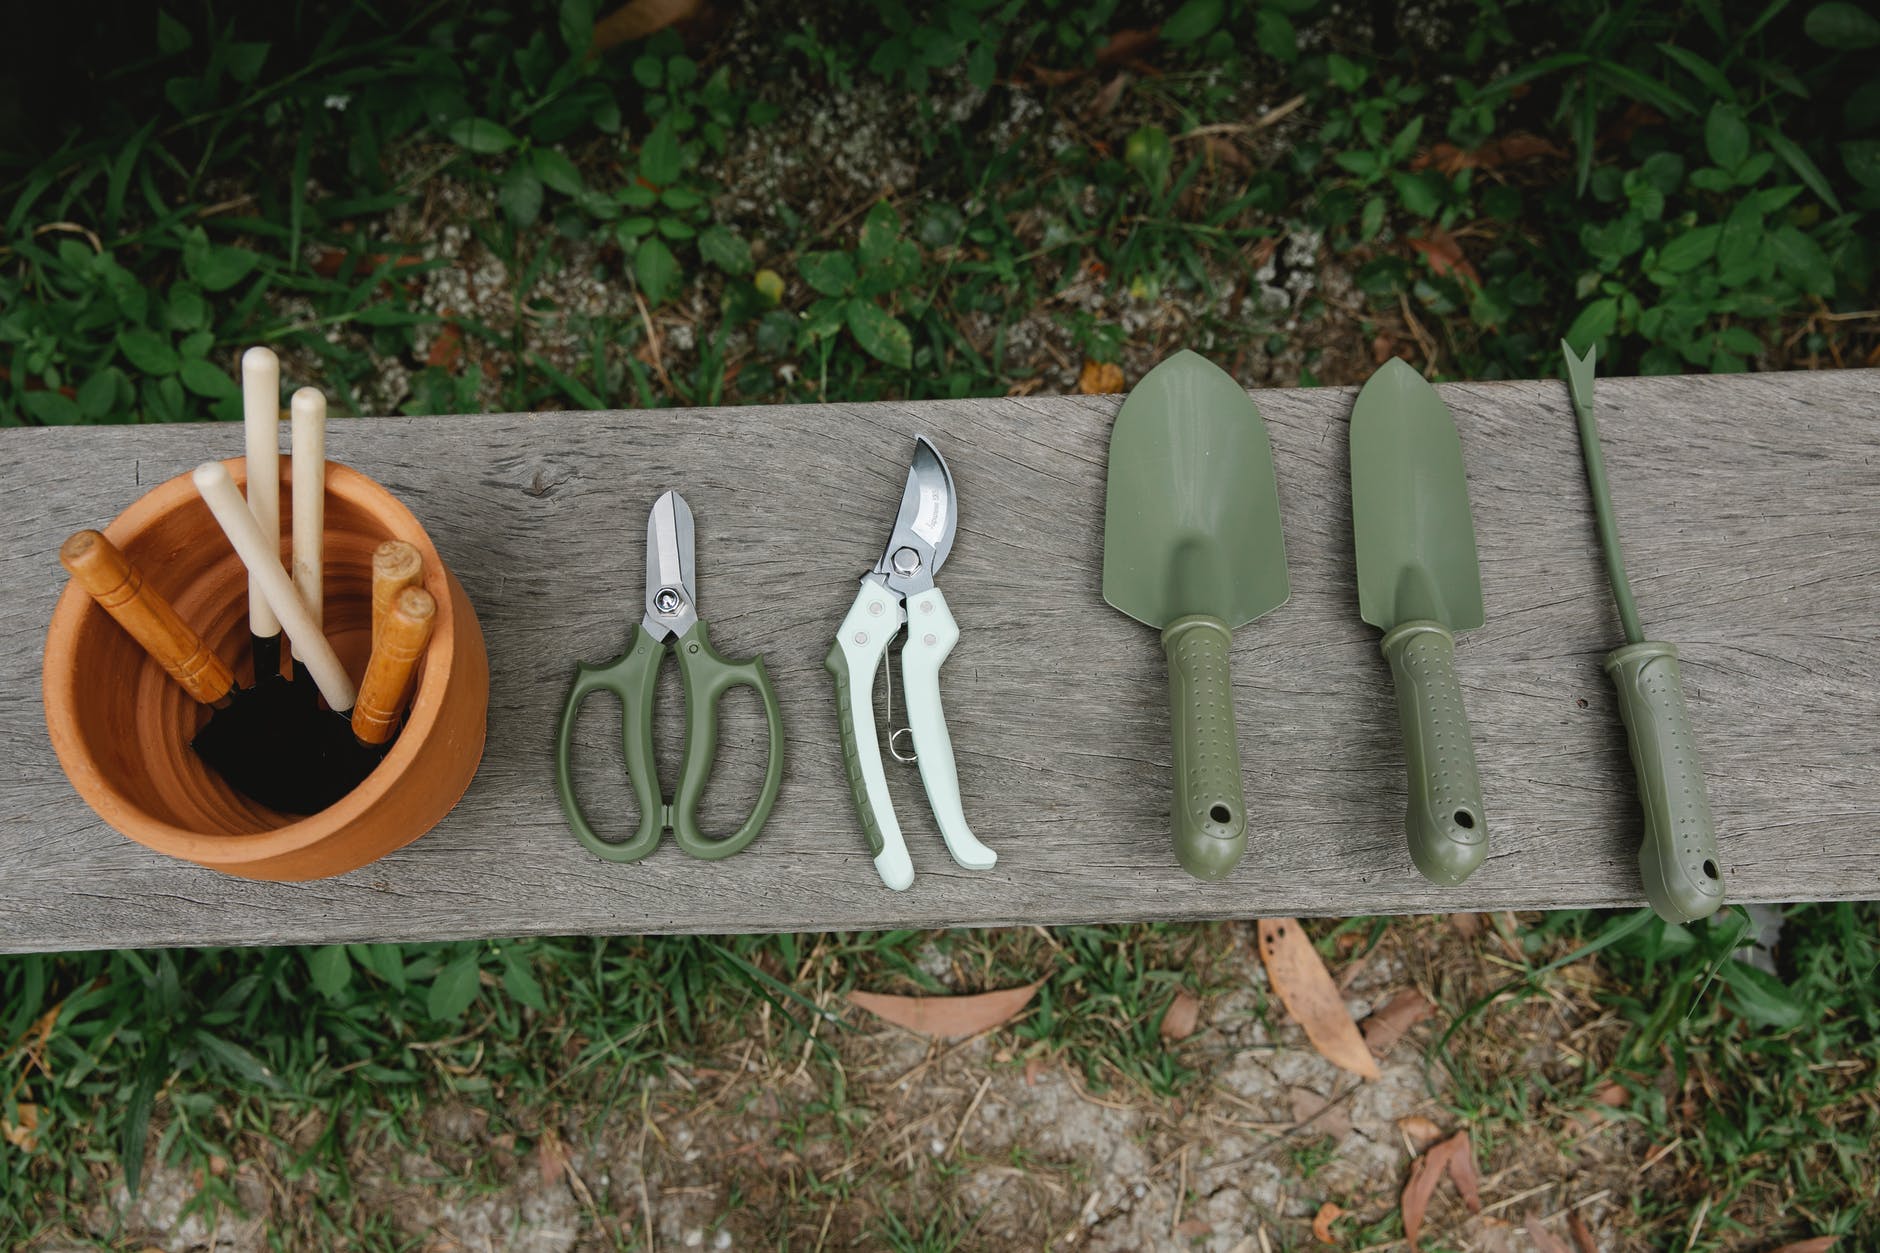 gardening tools on wooden bench in yard